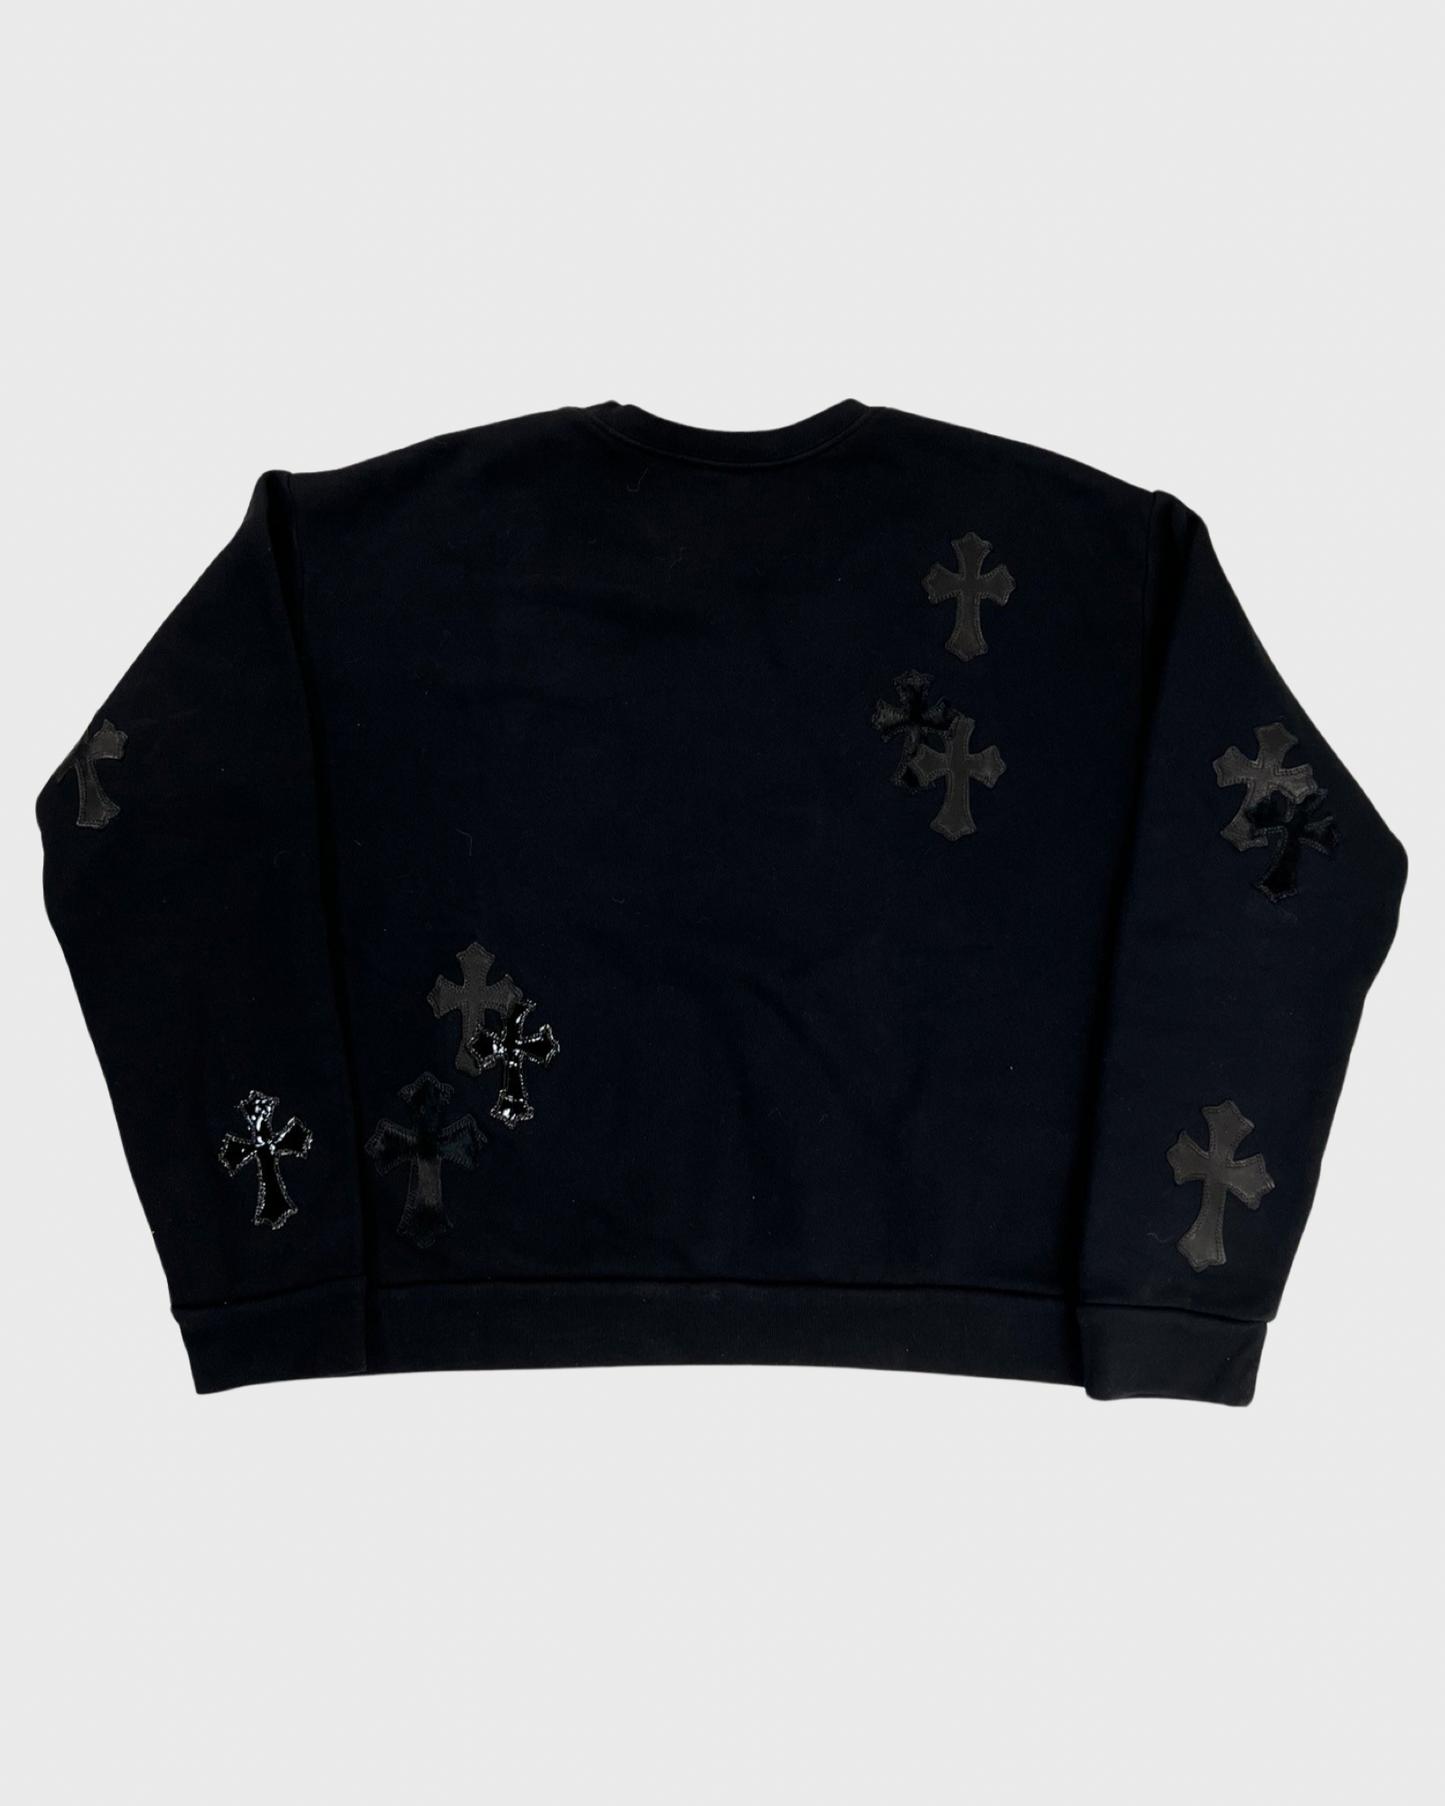 Chrome Hearts Sweater with black cross patches in Black SZ:S